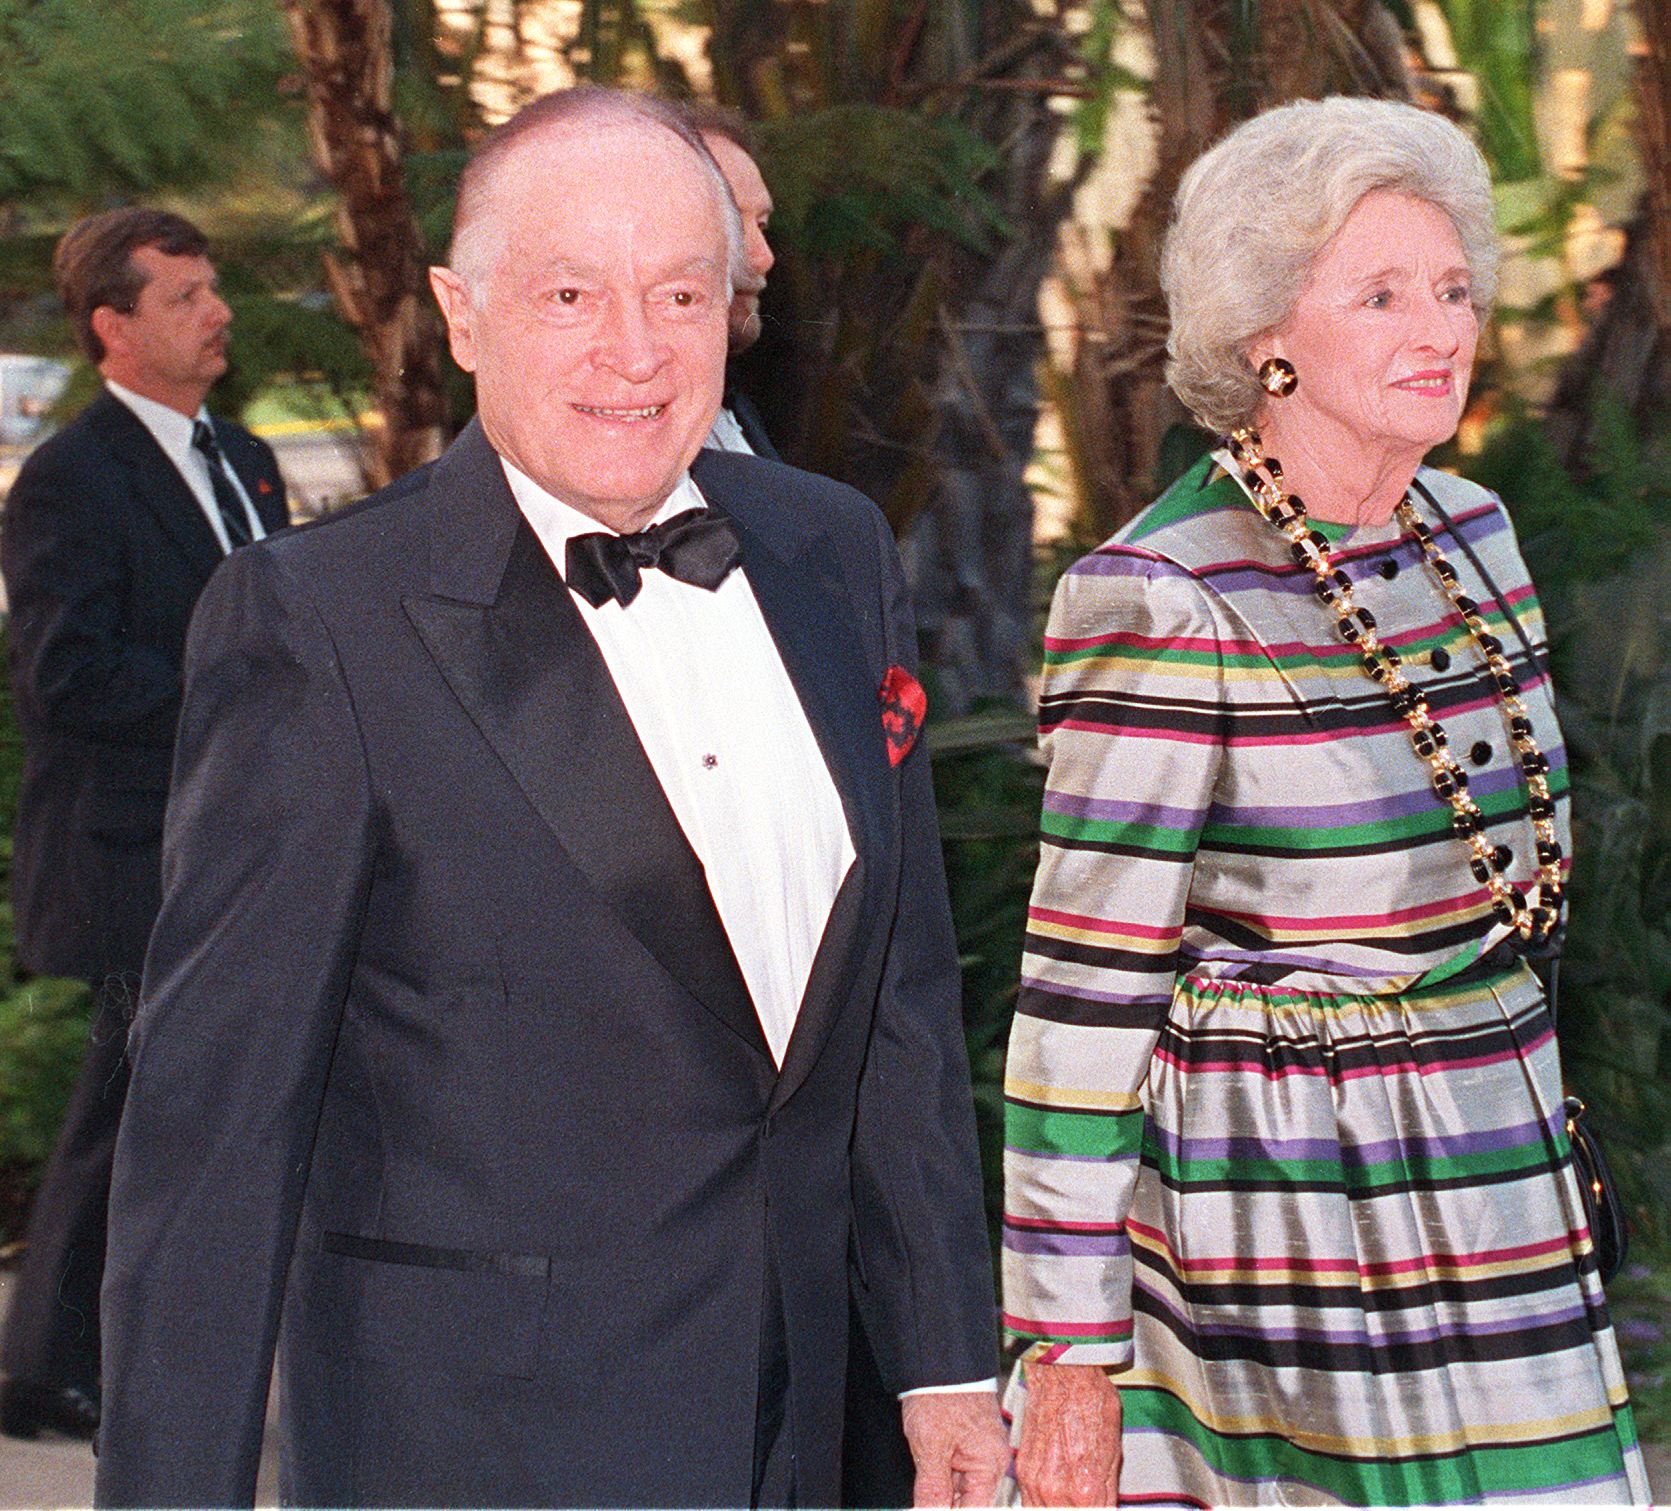 Bob Hope and Dolores Hope at a party on May 17, 1989 | Source: Getty Images